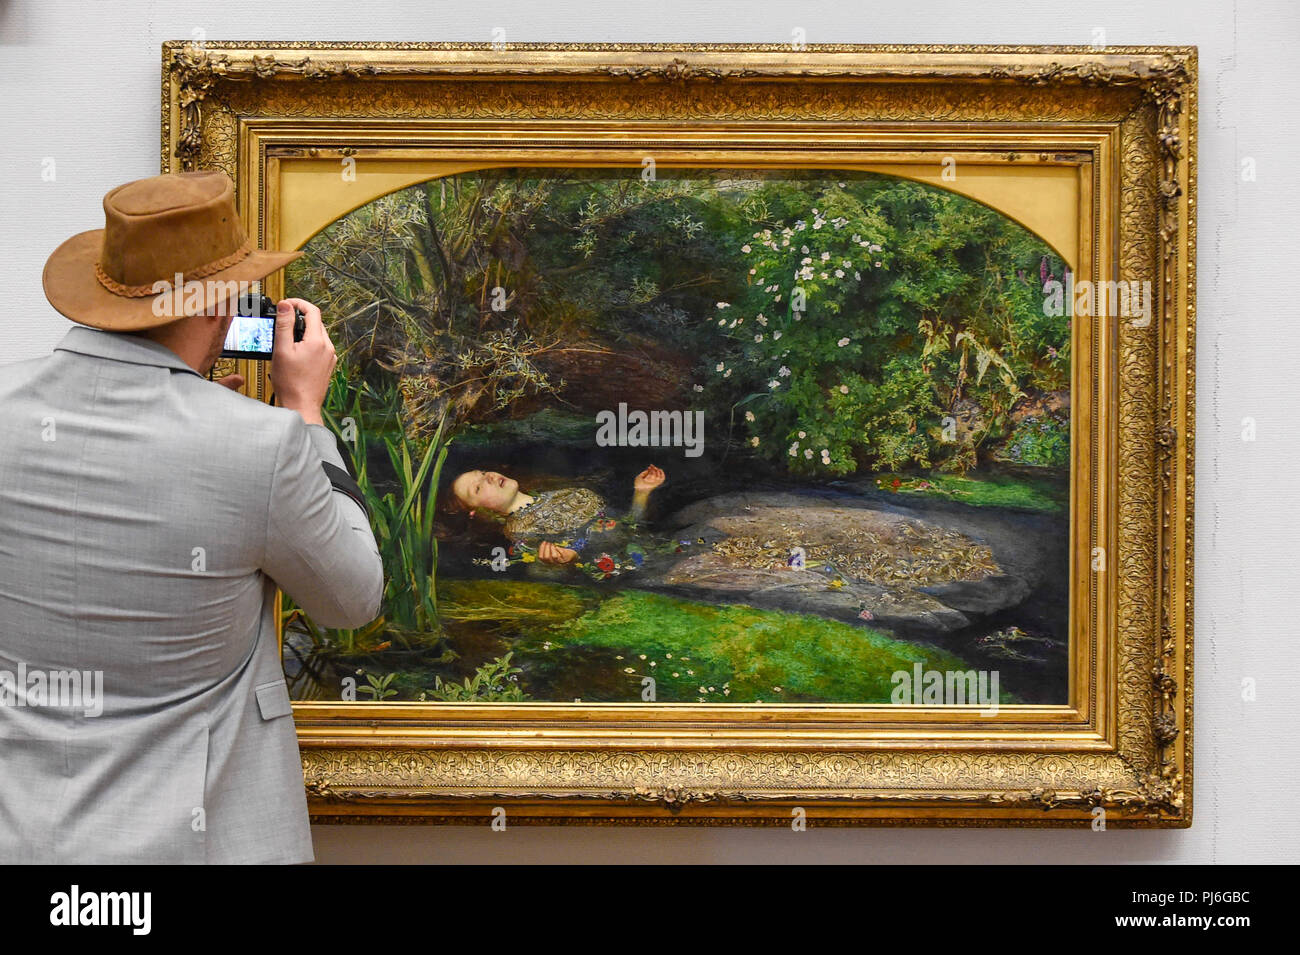 London, UK.  5 September 2018.  A visitor photographs 'Ophelia', 1851-52, by John Everett Millais, at Tate Britain, ahead of the launch of a major new exhibition at the National Gallery of Australia (NGA) in December 2018.  Over forty Pre-Raphaelite works will be loaned by Tate to NGA, which have never been shown in Australia until now, including 'Ophelia', 1851-52, by John Everett Millais and 'The Lady of Shalott', 1888, by John William Waterhouse. Credit: Stephen Chung / Alamy Live News Stock Photo